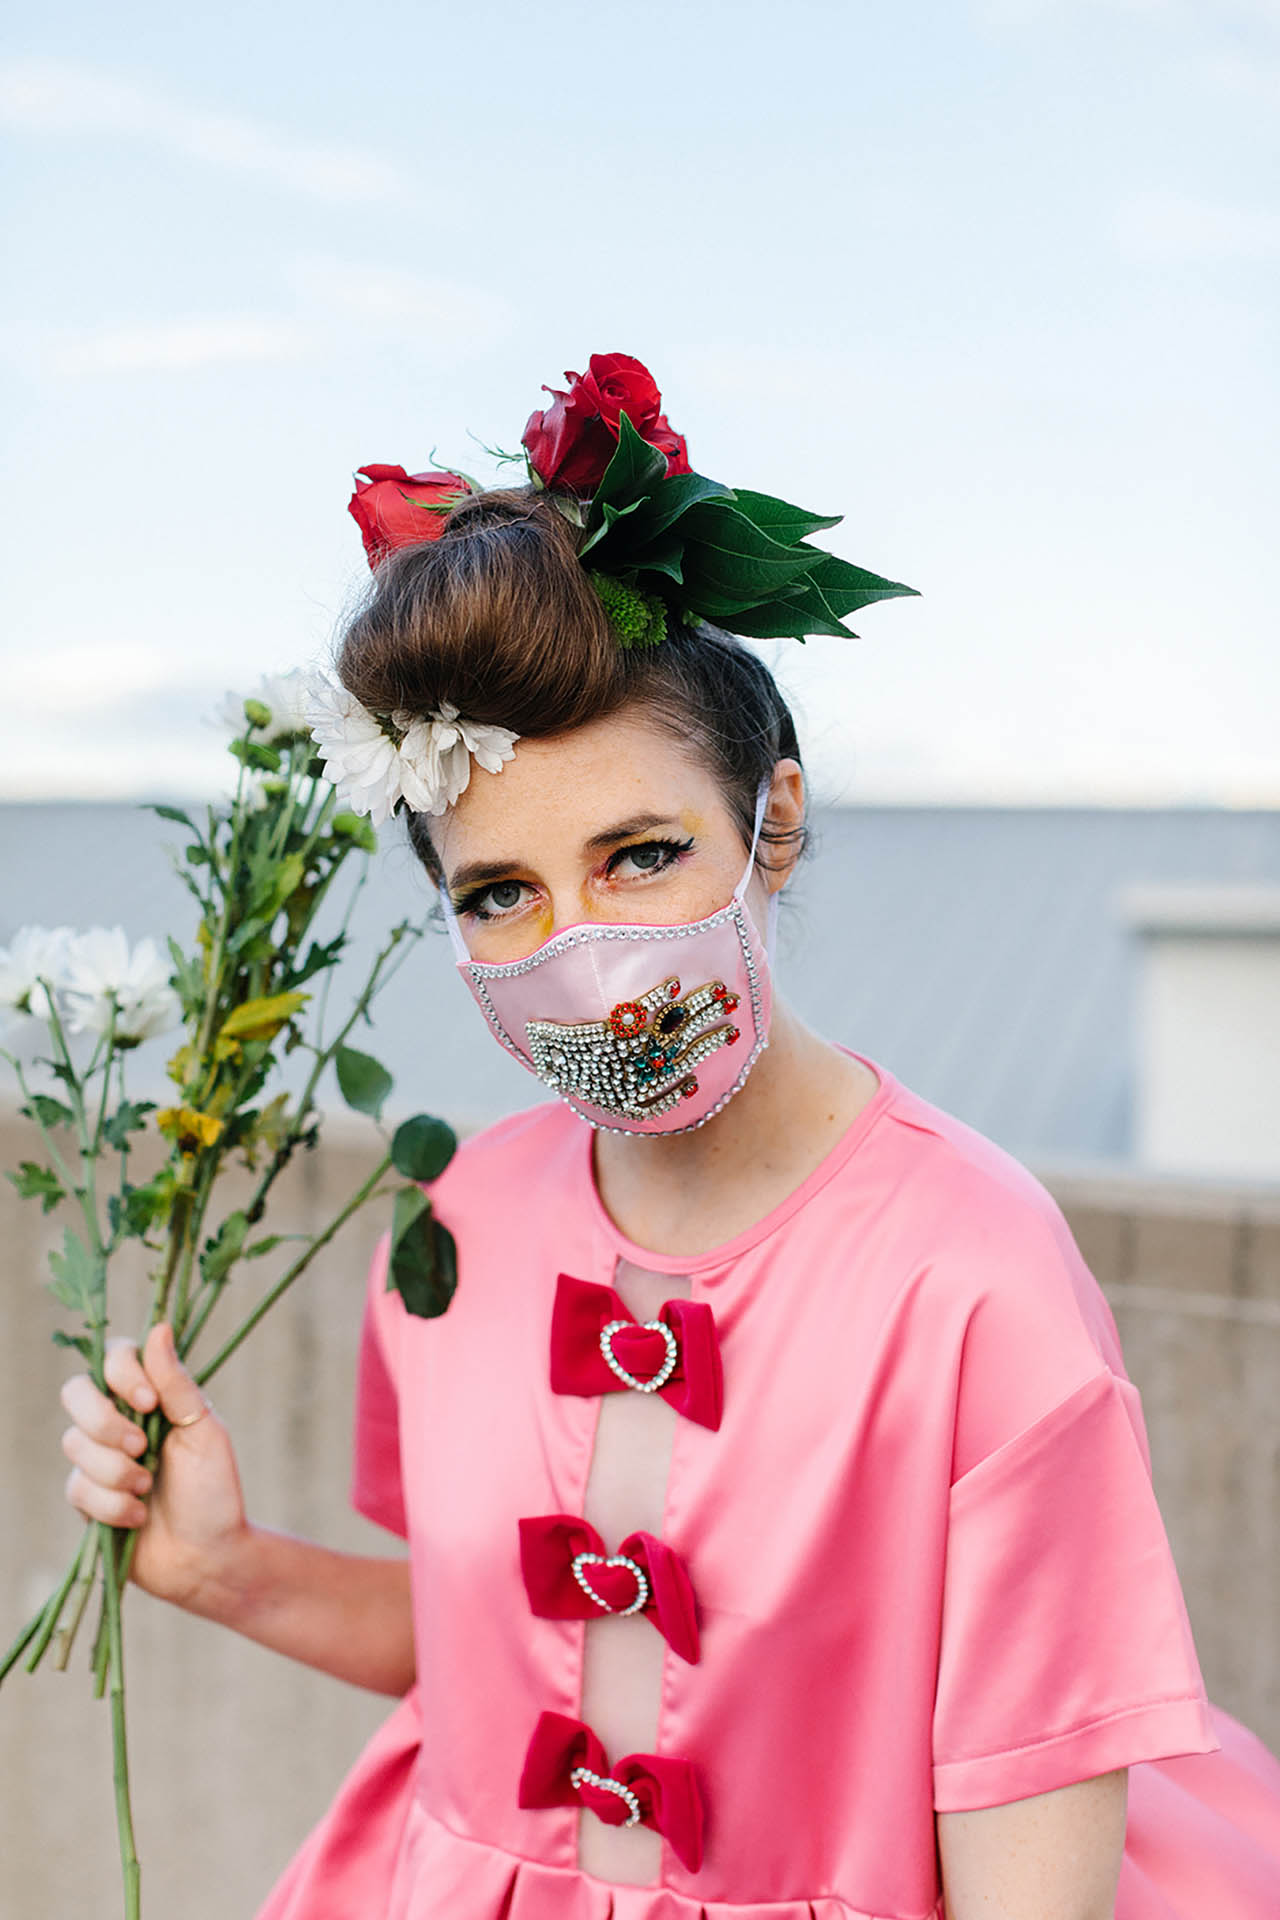 DFW editorial photos; a woman wearing a pink shirt and a pink mask covered in a rhinestones that creates a bejeweled hand on the mask. She is holding a small bouquet of white flowers while standing outside in an urban setting.